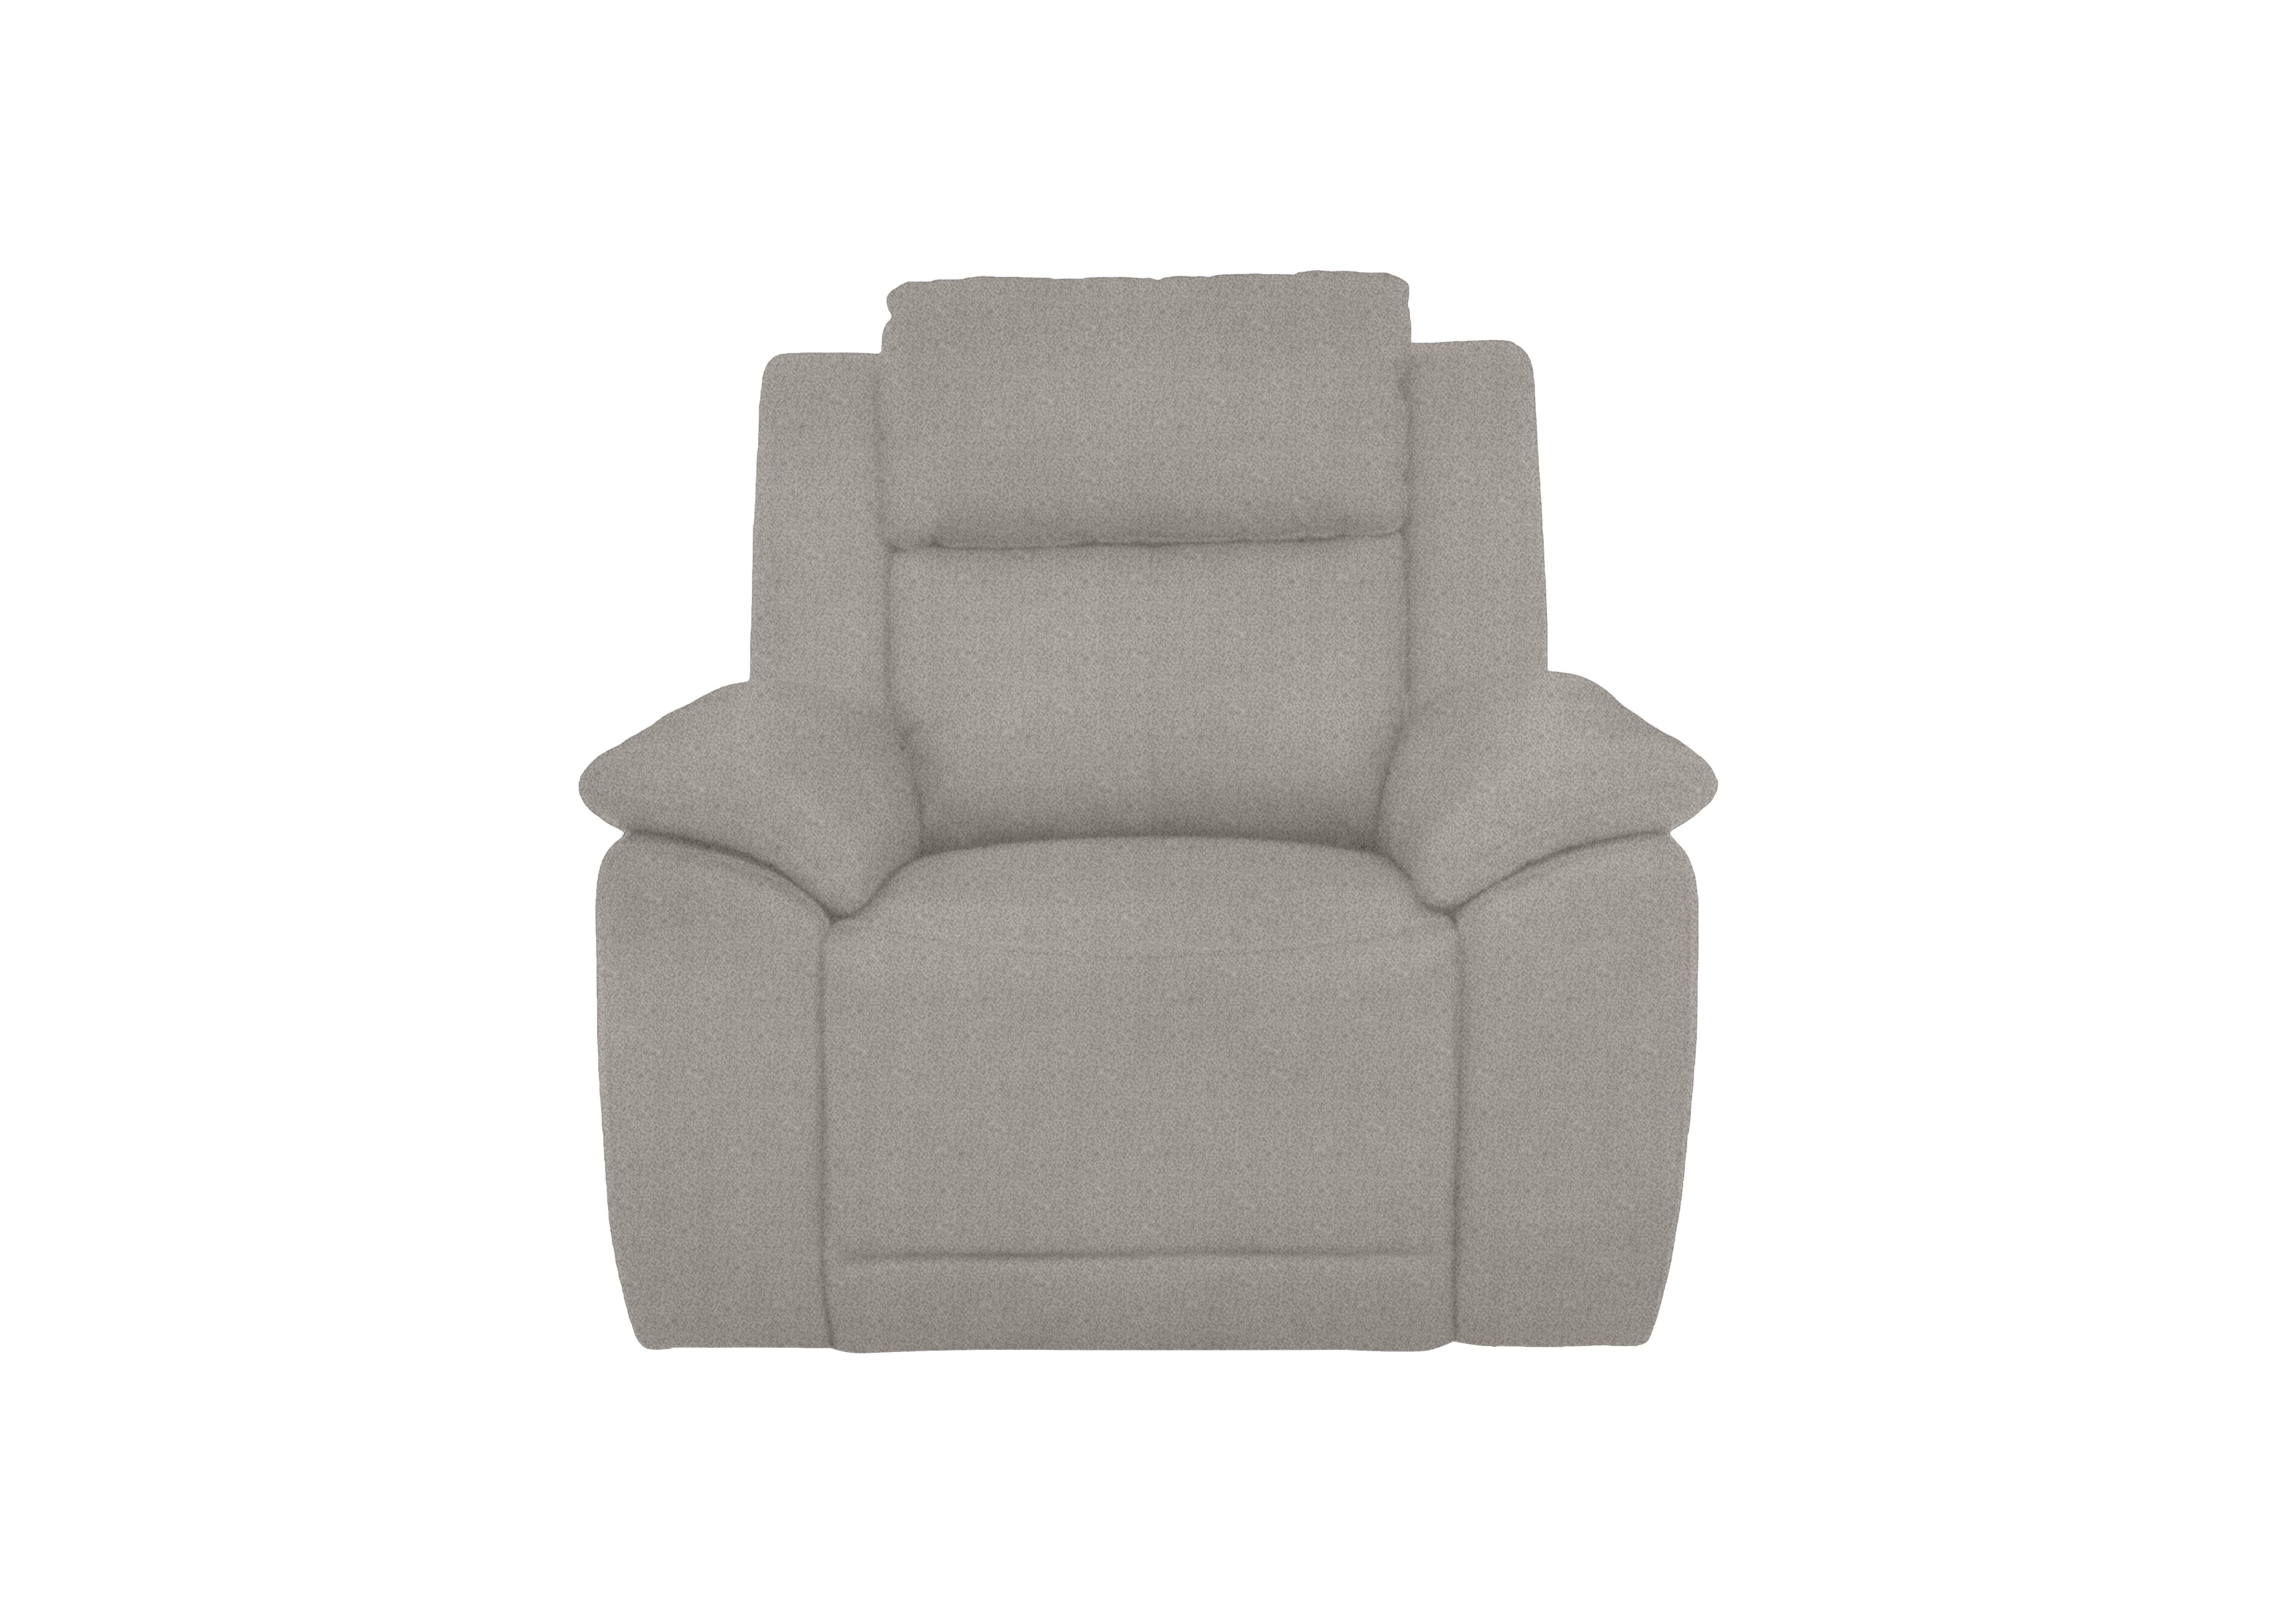 Utah Fabric Power Recliner Chair with Power Headrest and Power Lumbar in Rosy Light Grey Rs-0102 on Furniture Village